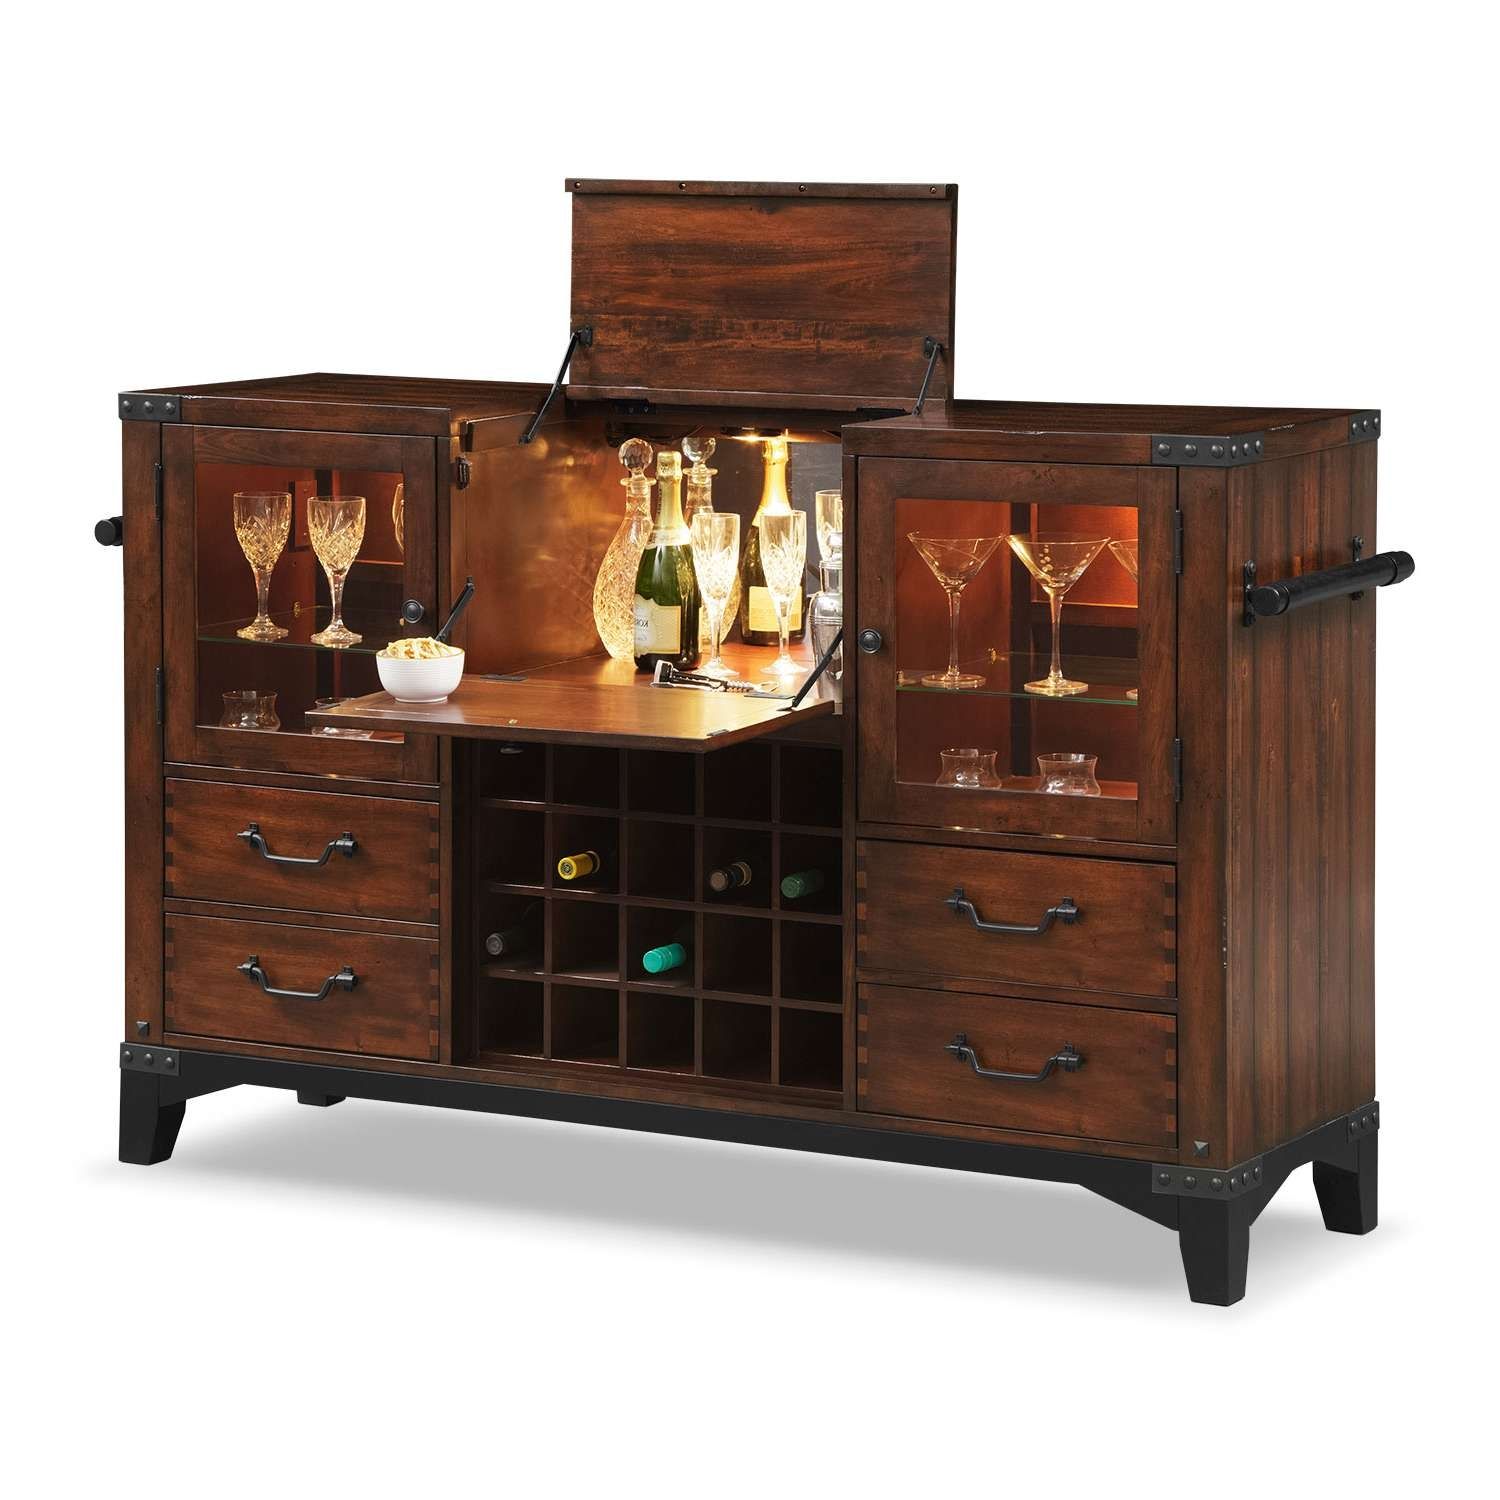 Buffet & Sideboard Cabinets | American Signature Furniture Regarding Sideboards With Hutch (View 15 of 20)